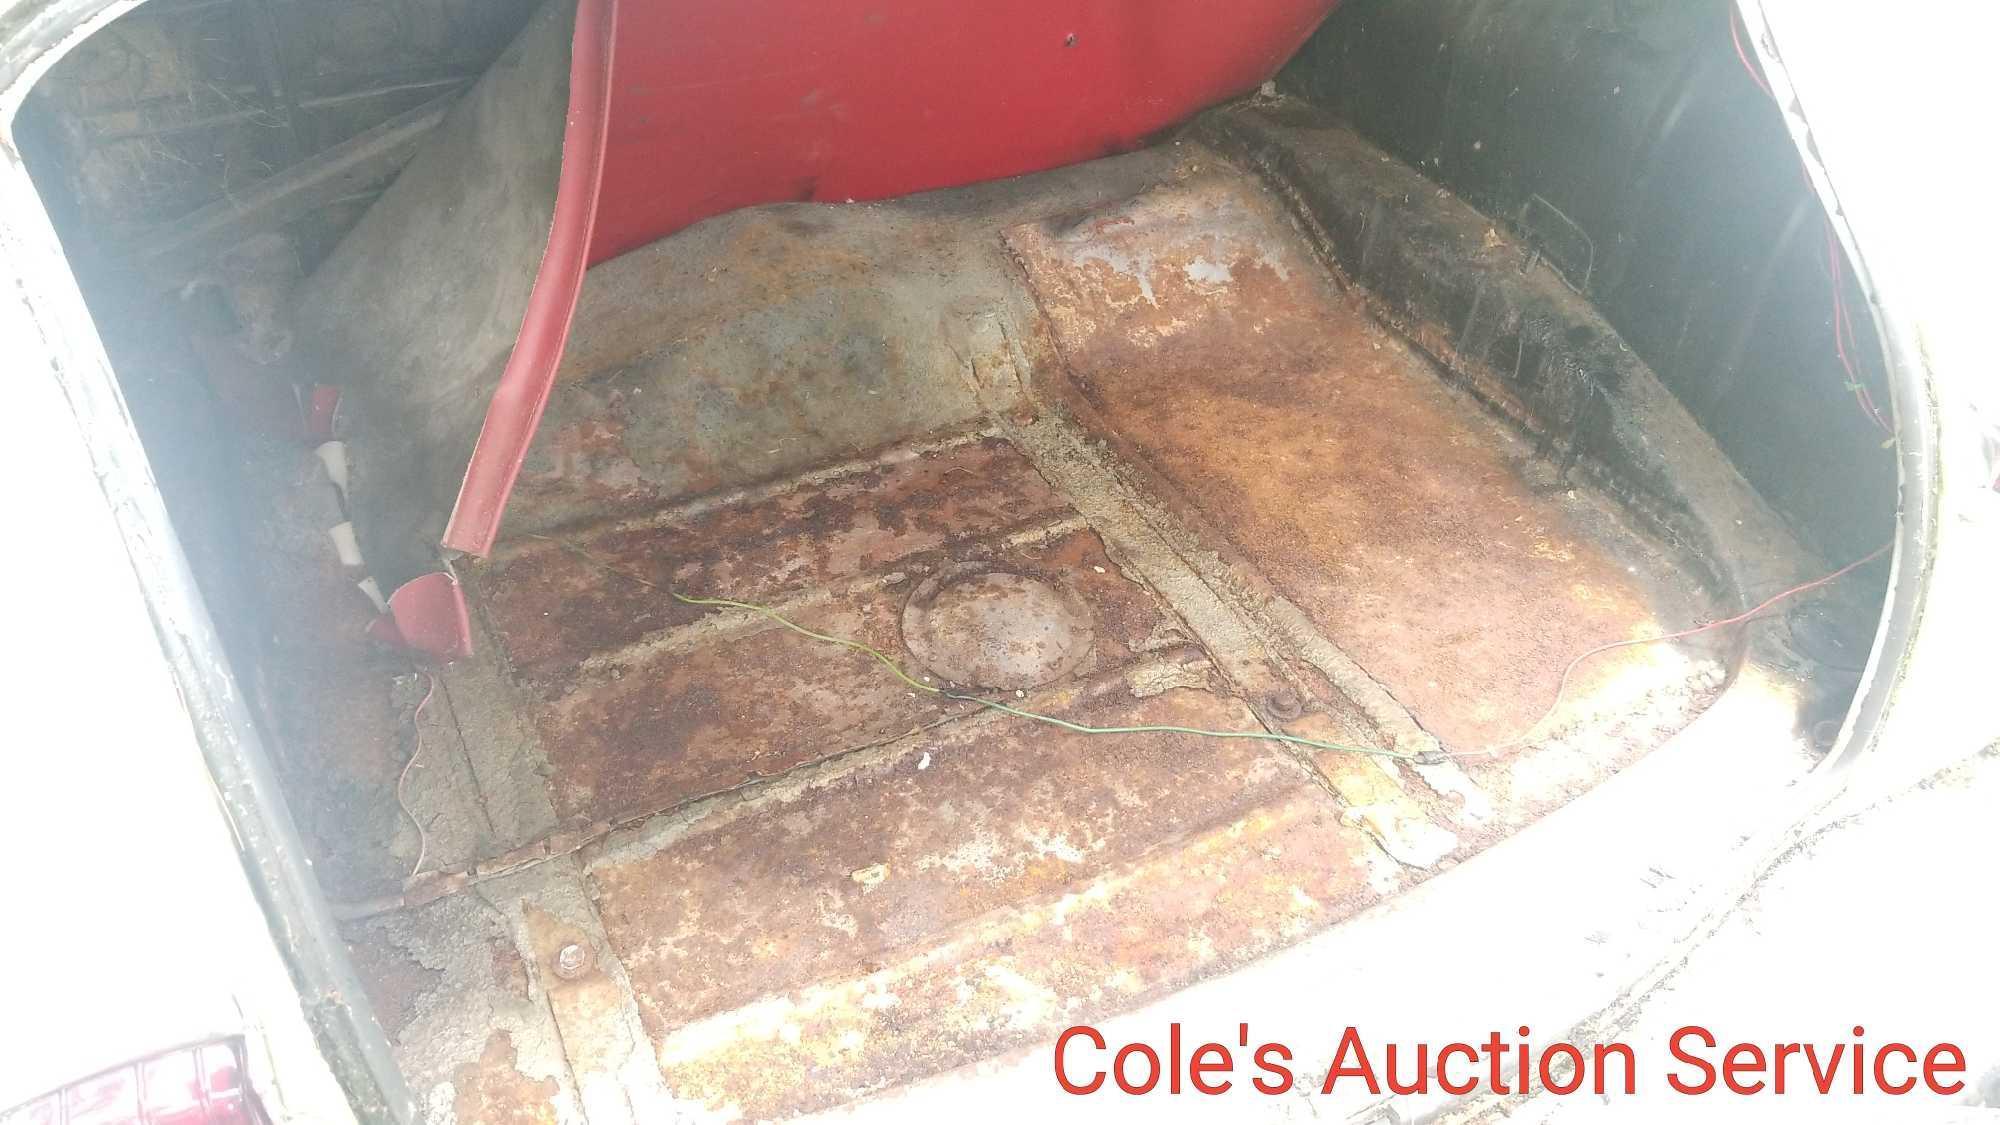 1948 Plymouth 4 door sedan barn find. See the many pictures as this looks to be a nice solid mid